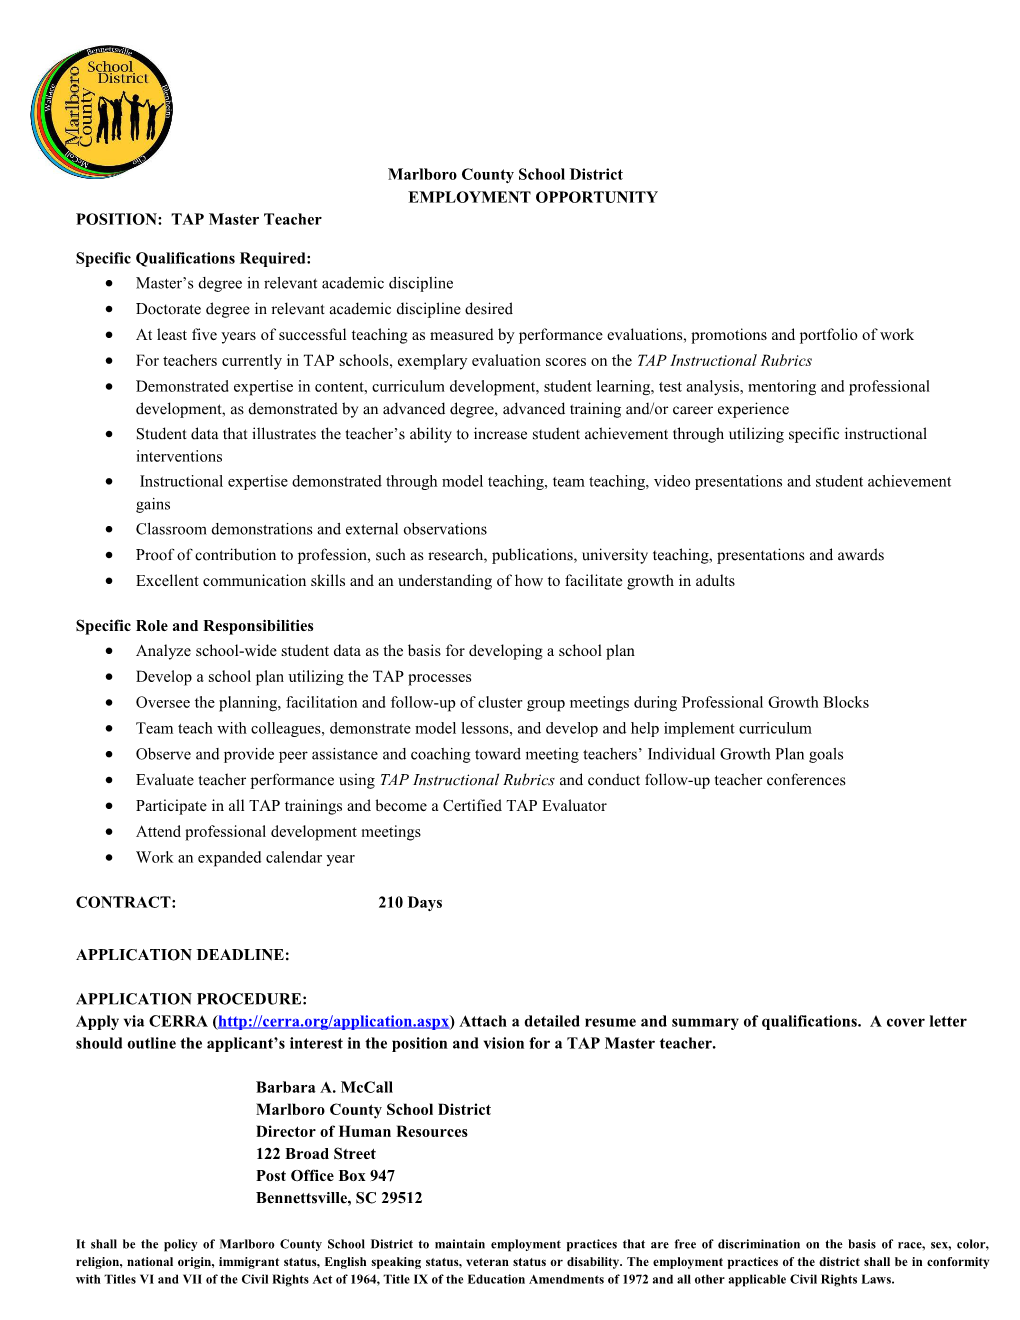 Employment Opportunity s29